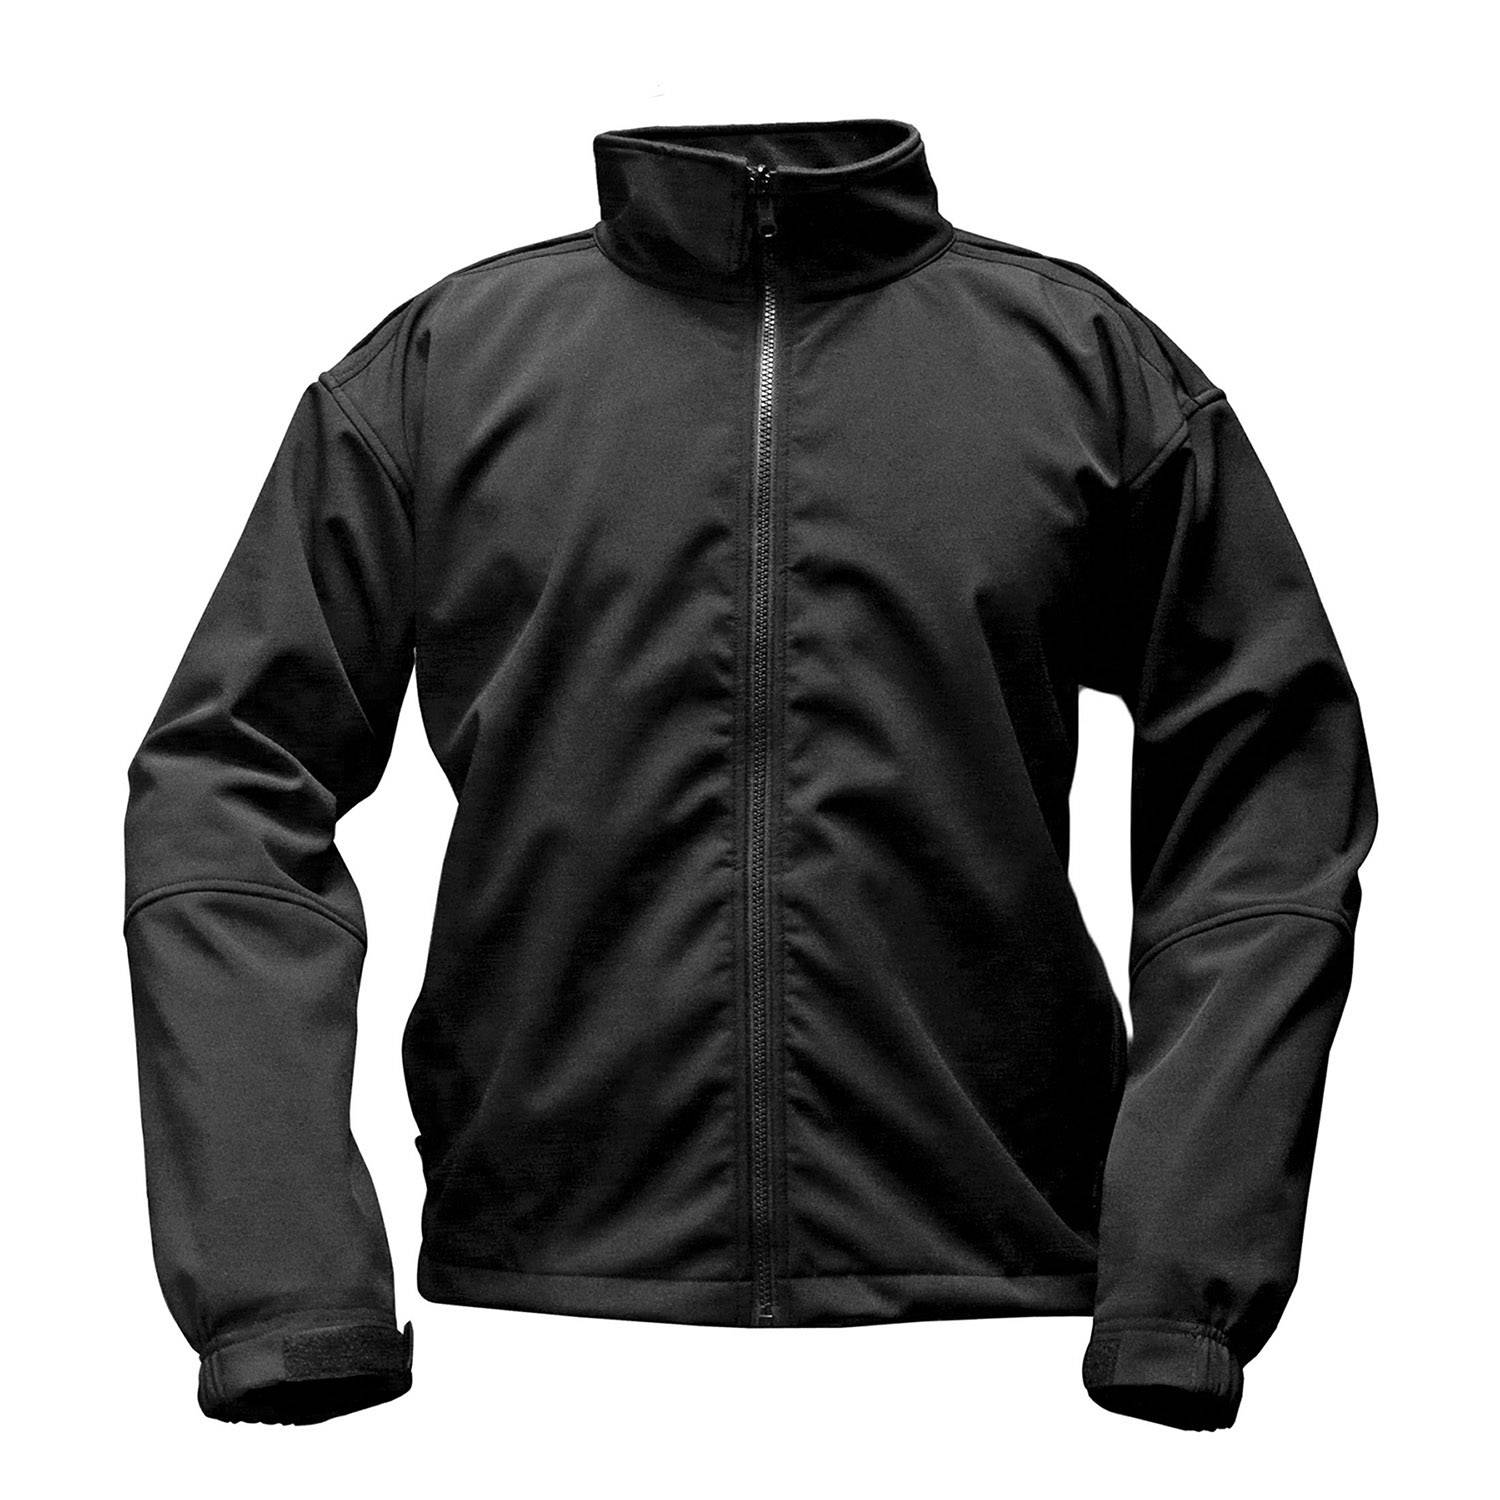 SPIEWAK PERFORMANCE SOFT JACKET WITH SIDE VENT ZIPPERS